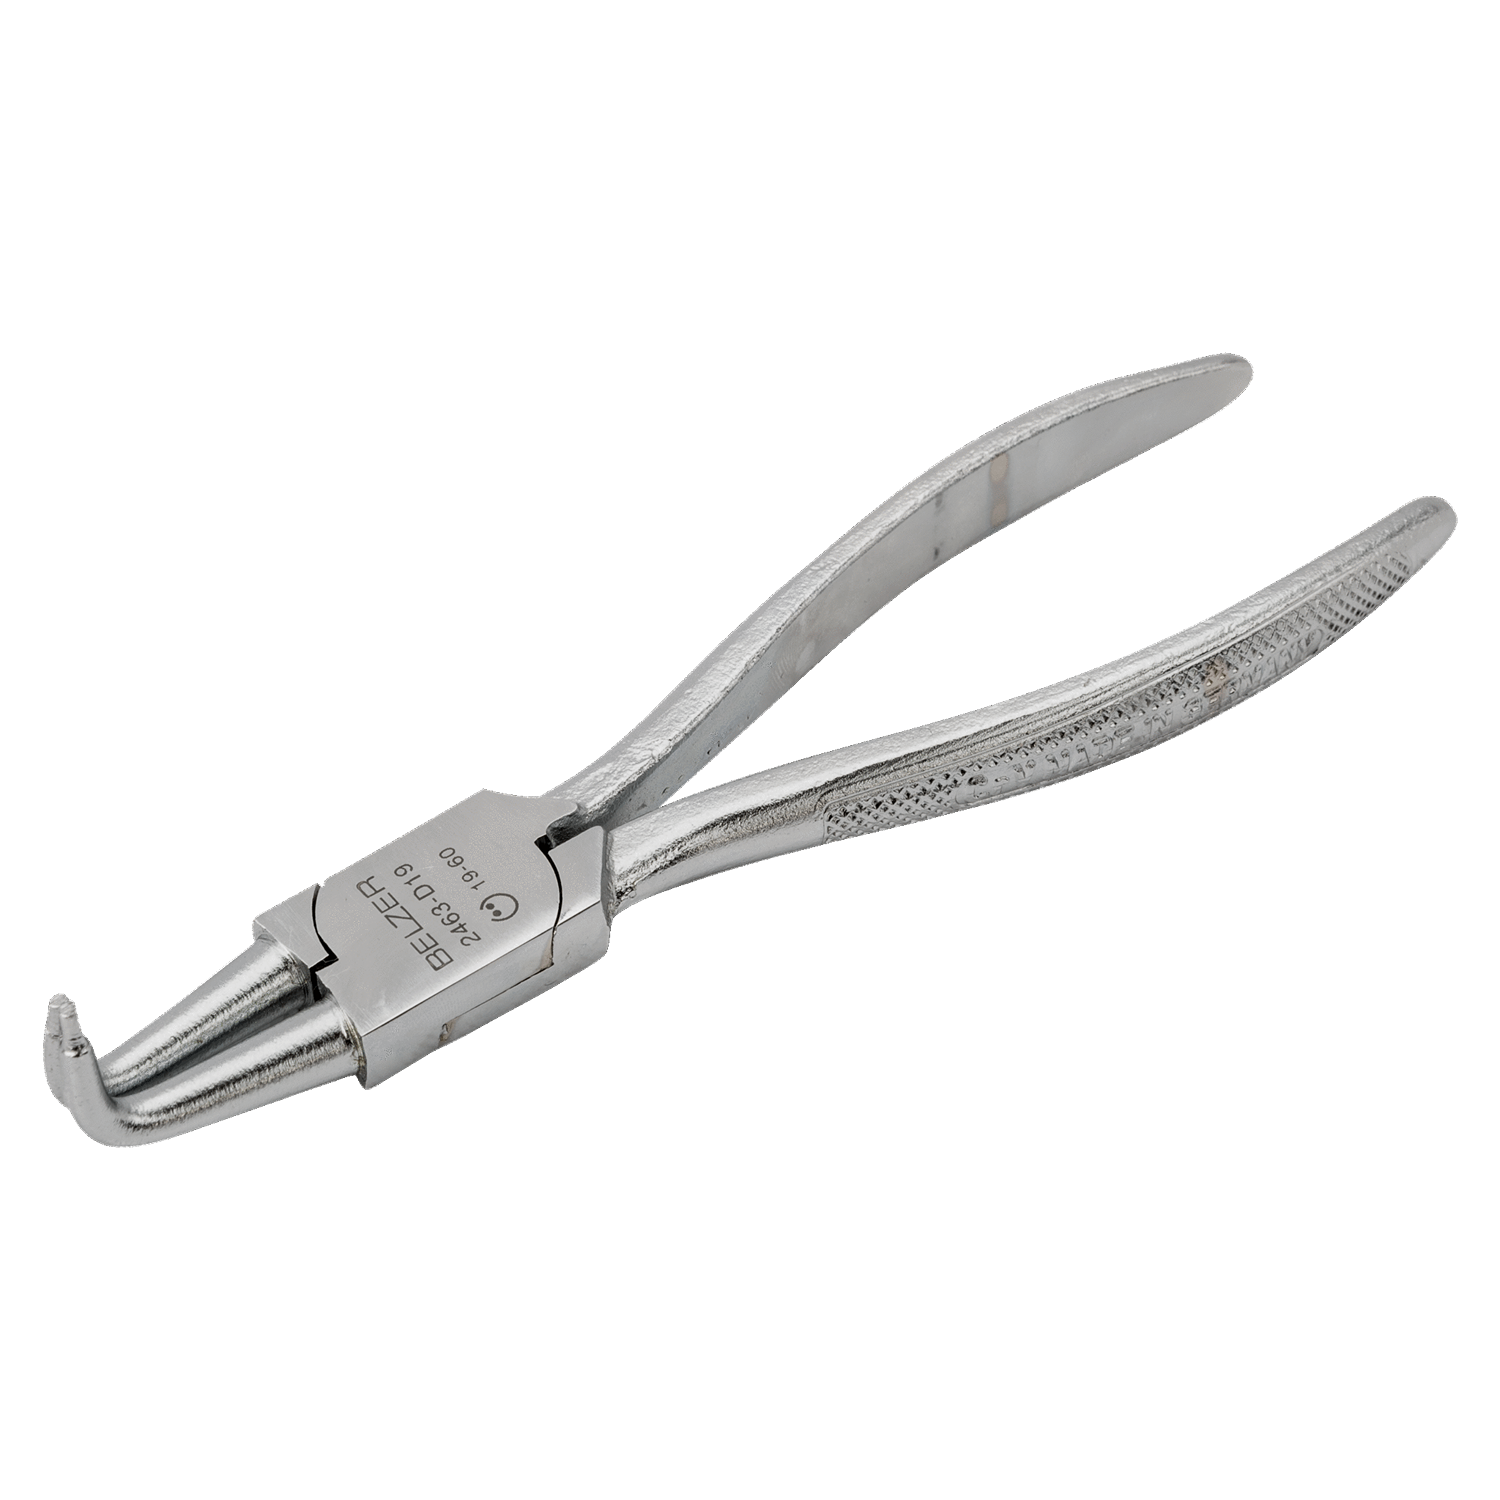 BAHCO 2463 Internal Circlip Plier with 90° Offset Jaws - Premium Circlip Plier from BAHCO - Shop now at Yew Aik.